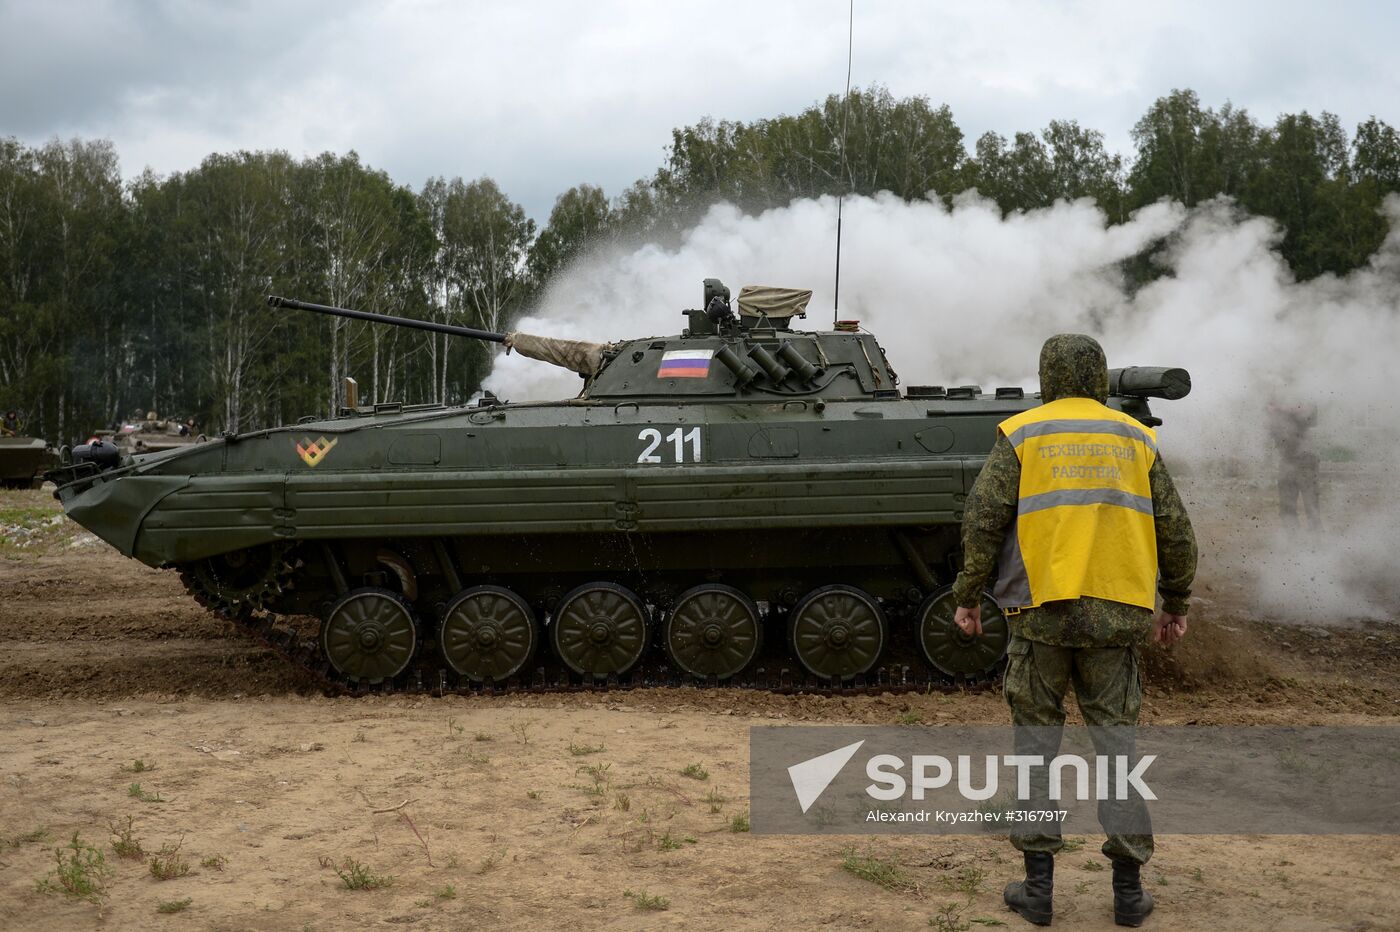 Novosibirsk Region hosts Army Scout Masters international competition